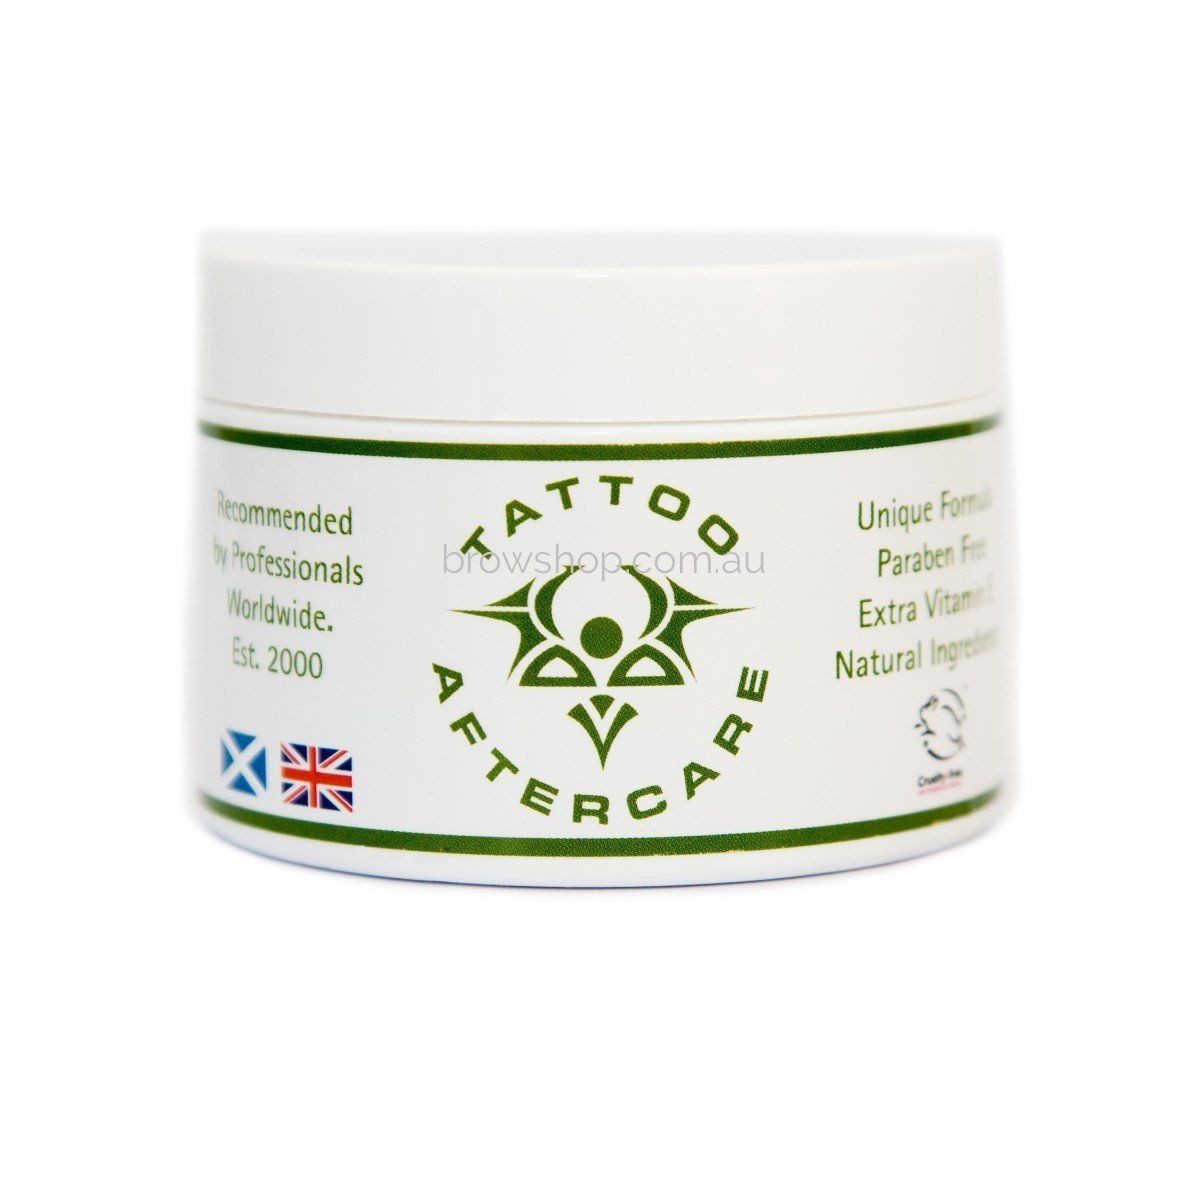 Tattoo Aftercare - 100g (Single) – Browshop